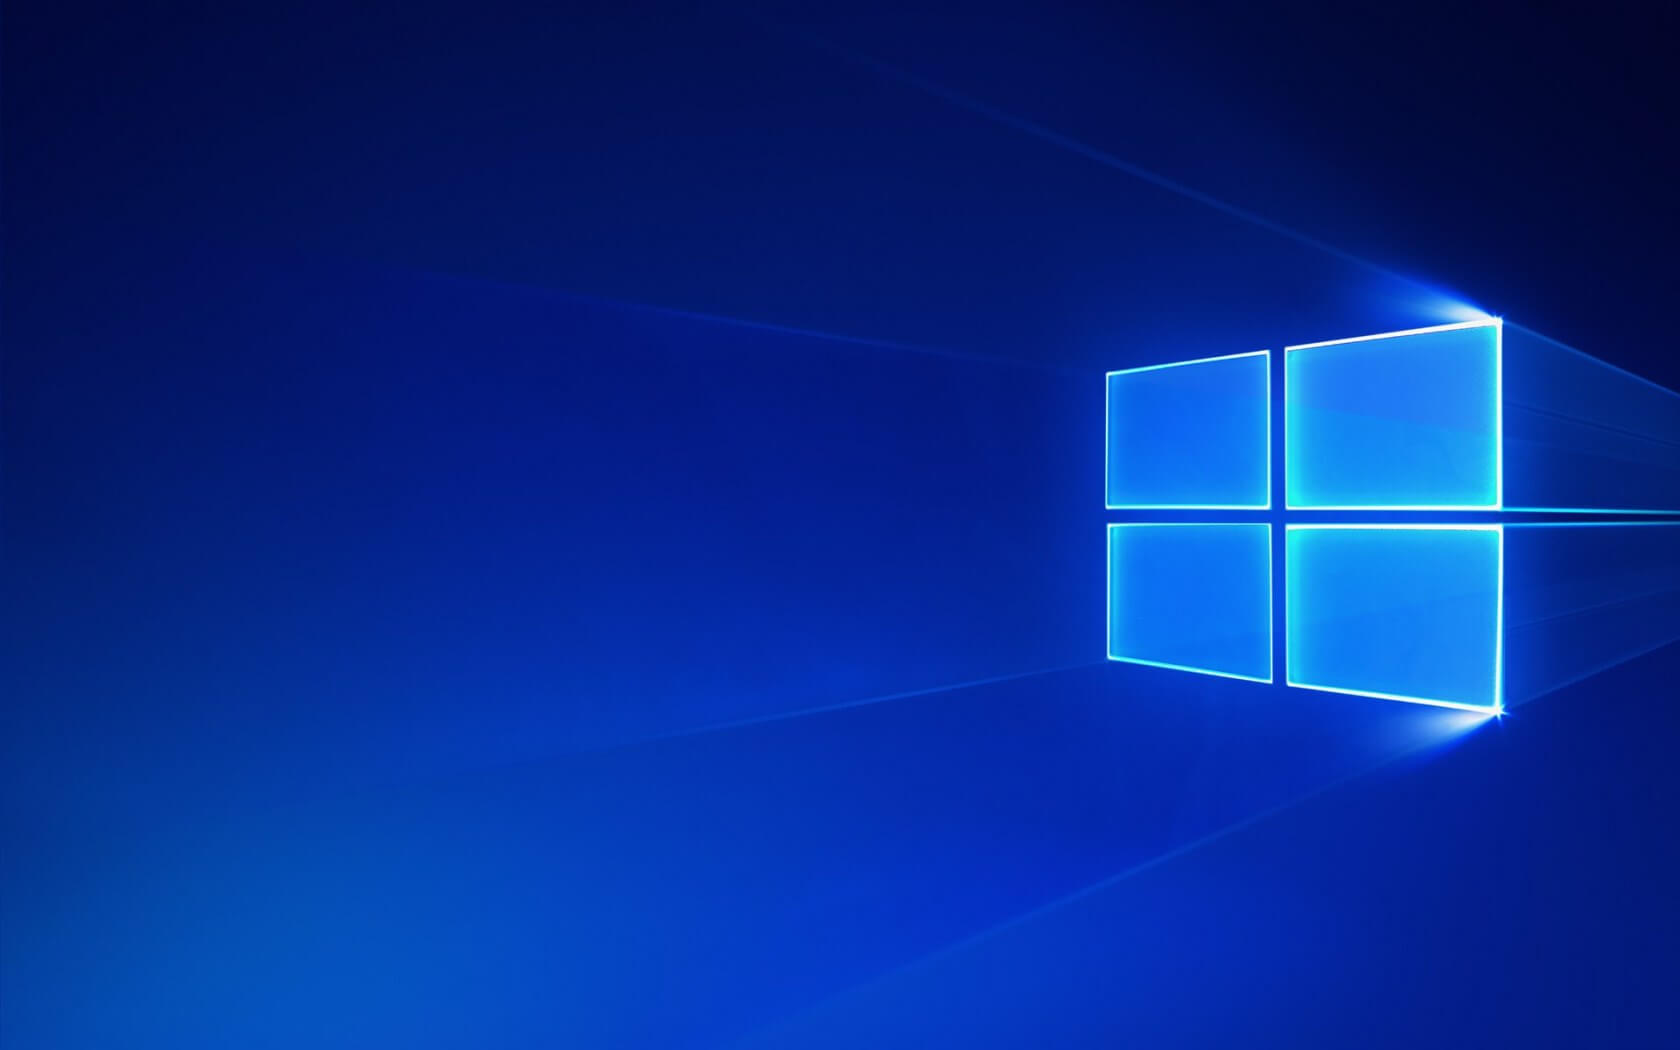 Almost 50 percent of all PCs are now running Windows 10, research claims